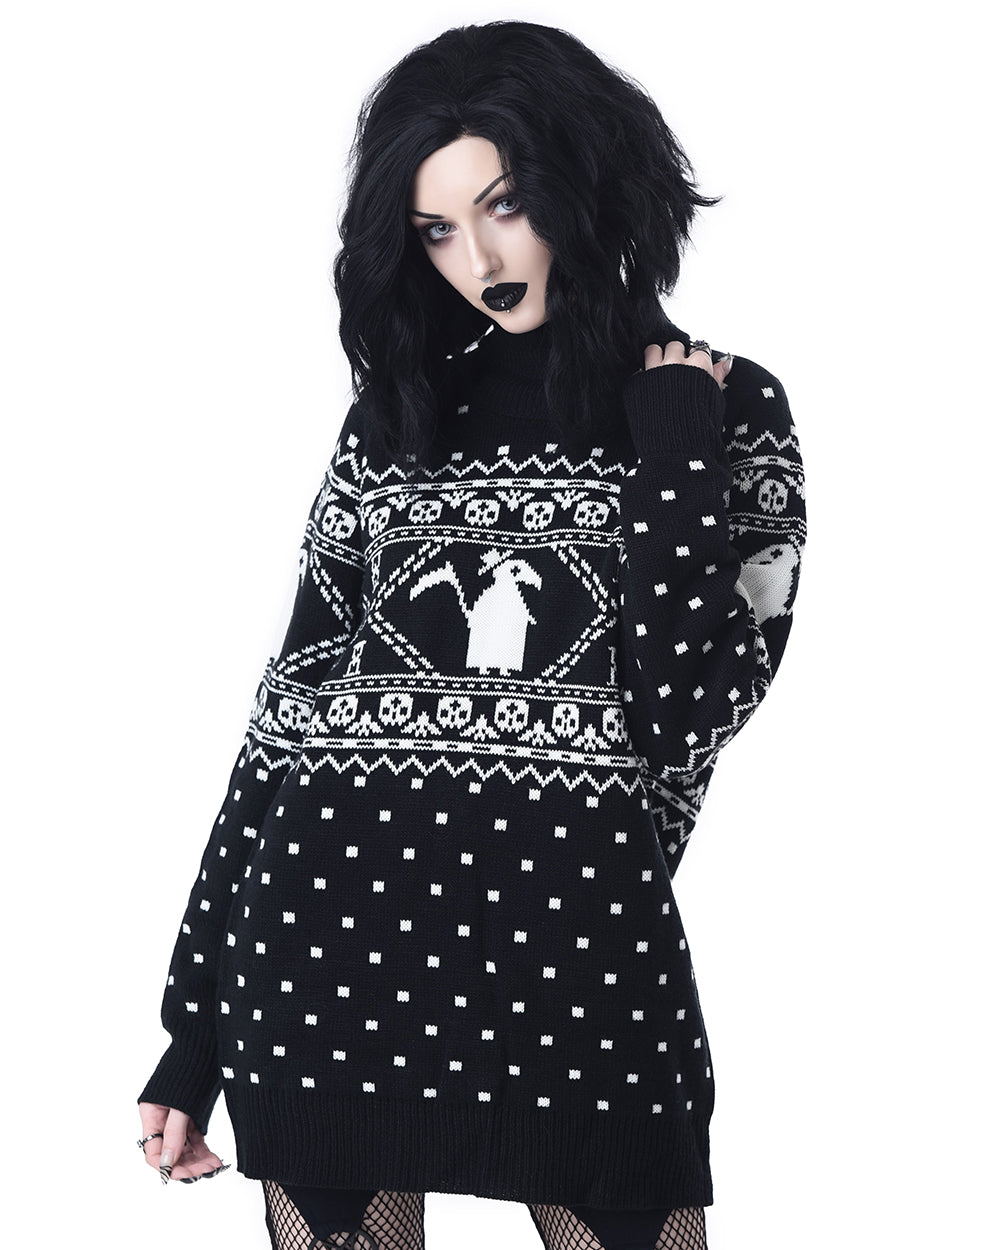 Plague Doctor Knitted Sweater